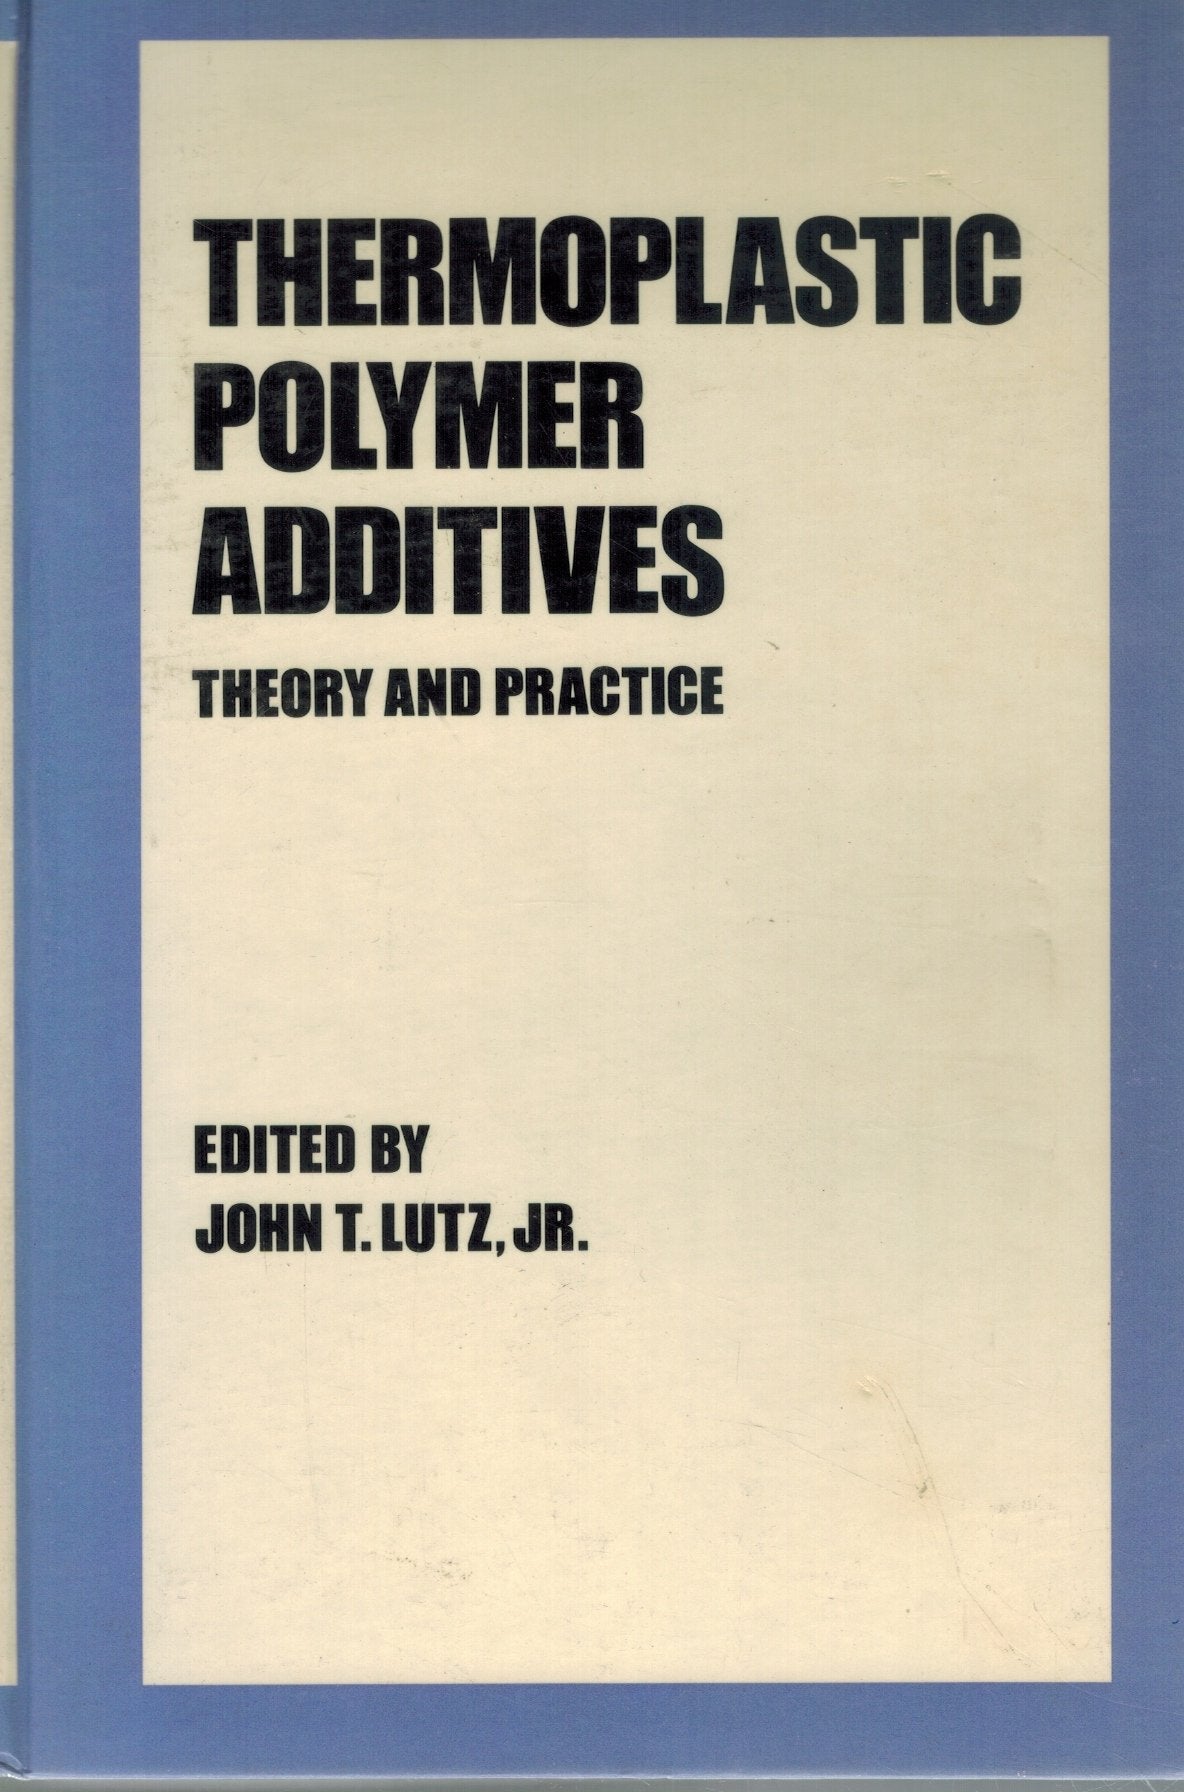 THERMOPLASTIC POLYMER ADDITIVES Theory and Practice  by Lutz, John T.